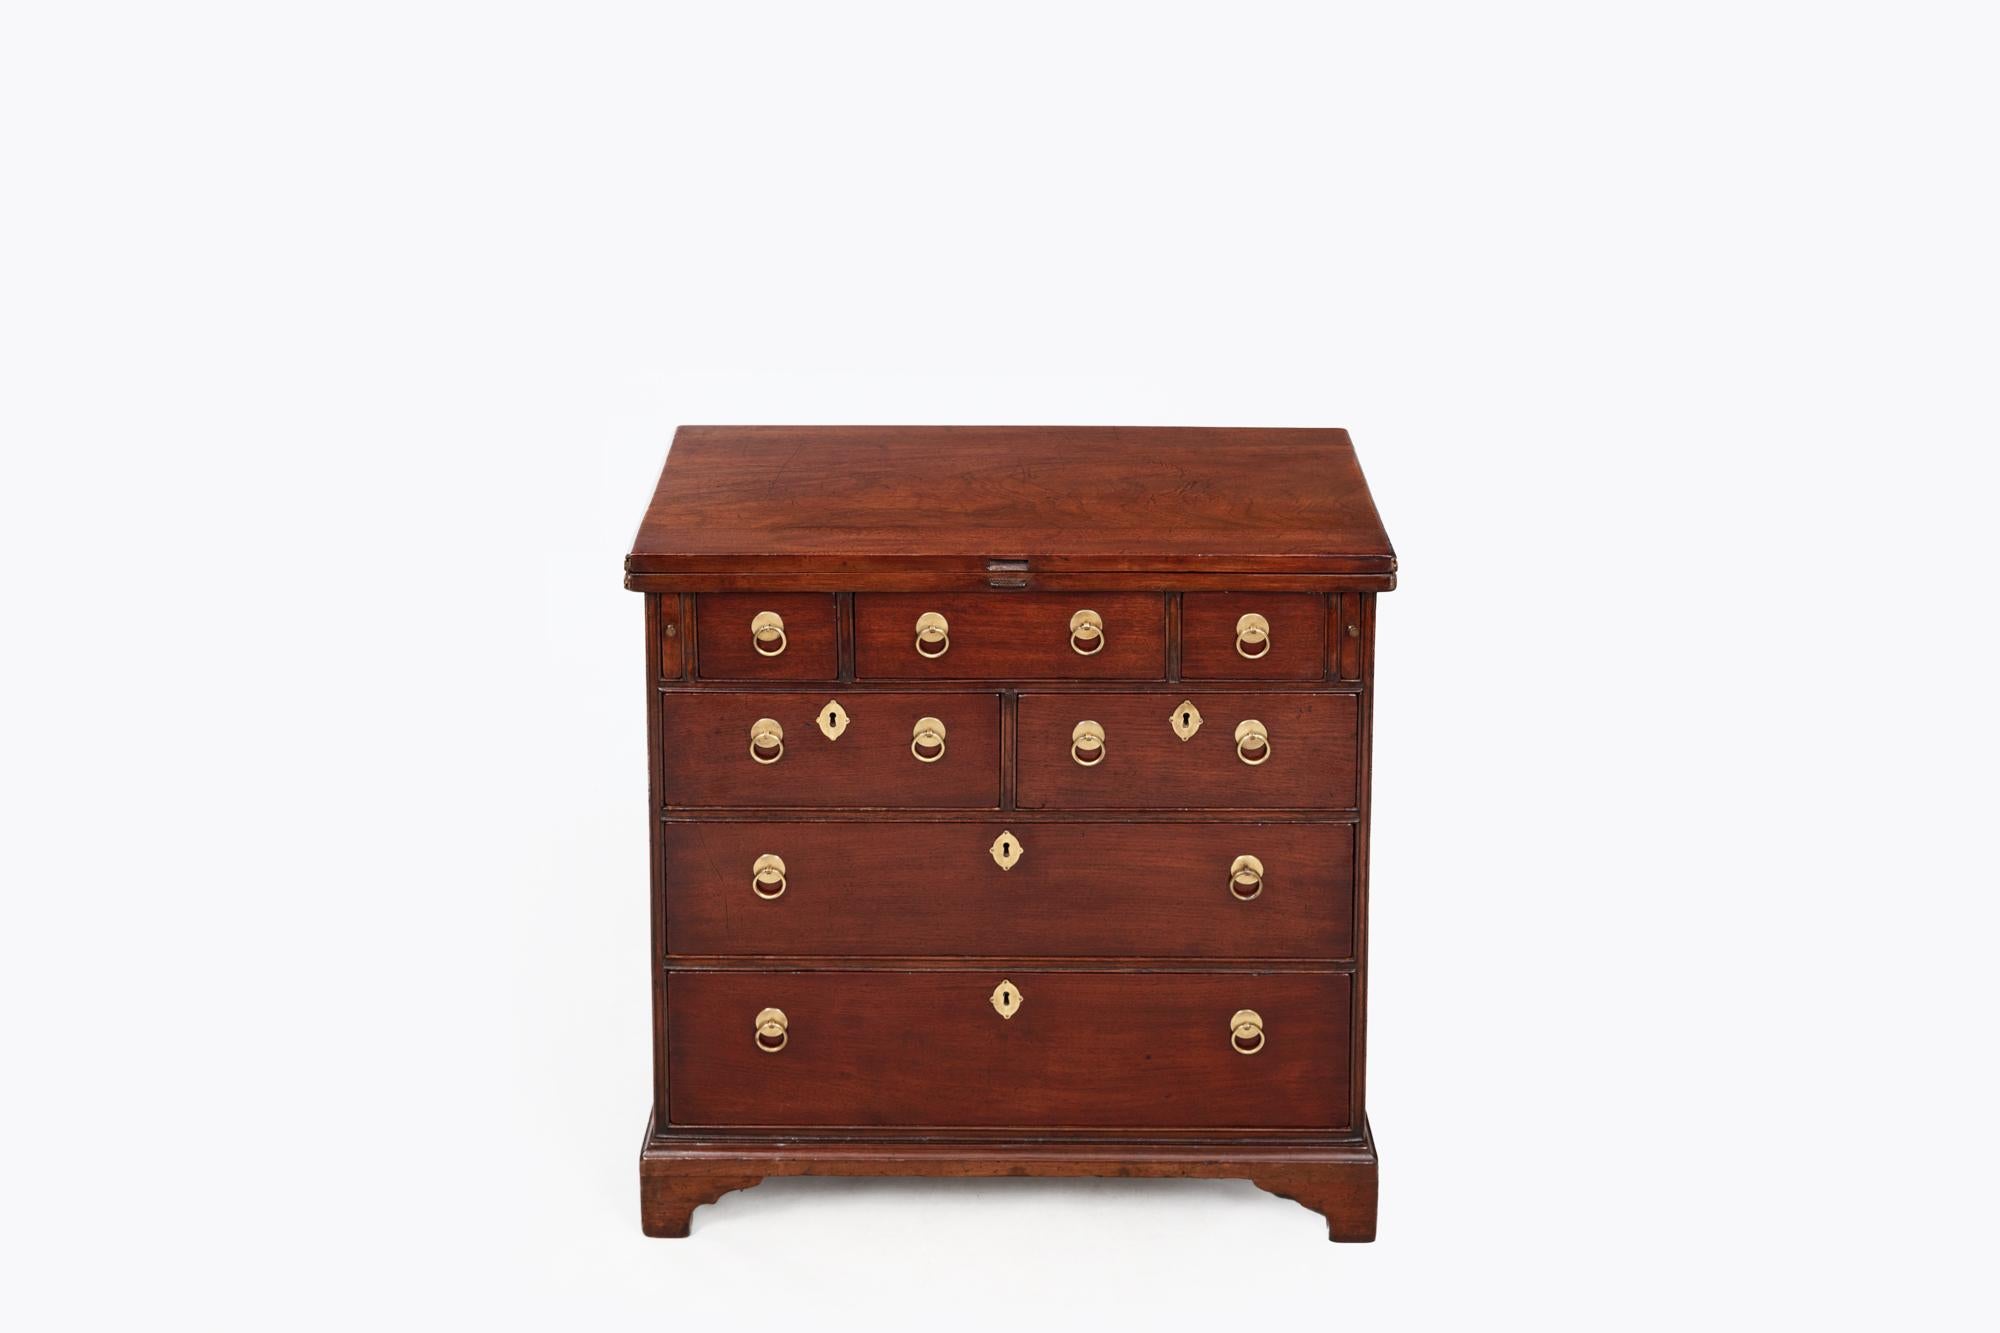 18th Century Georgian mahogany bachelor’s chest with original brass ring handles and escutcheons. Featuring fold-over top, pull-out leaf supports, and seven drawers. Raised on simple ogee bracket feet.